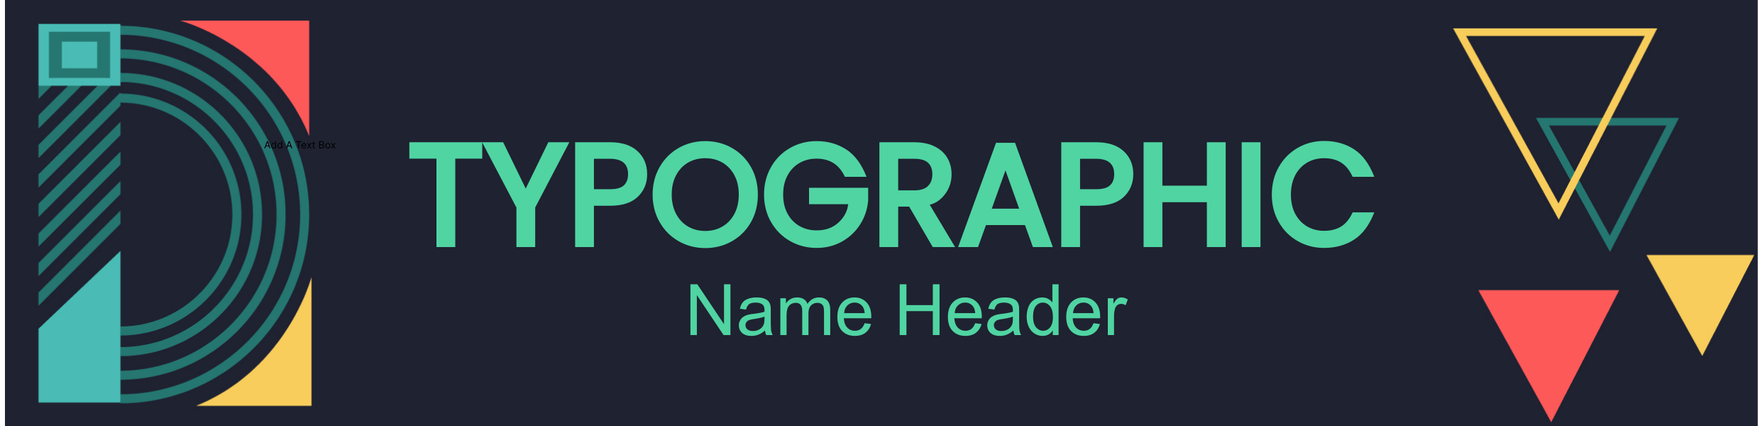 Typographic Name Header Template